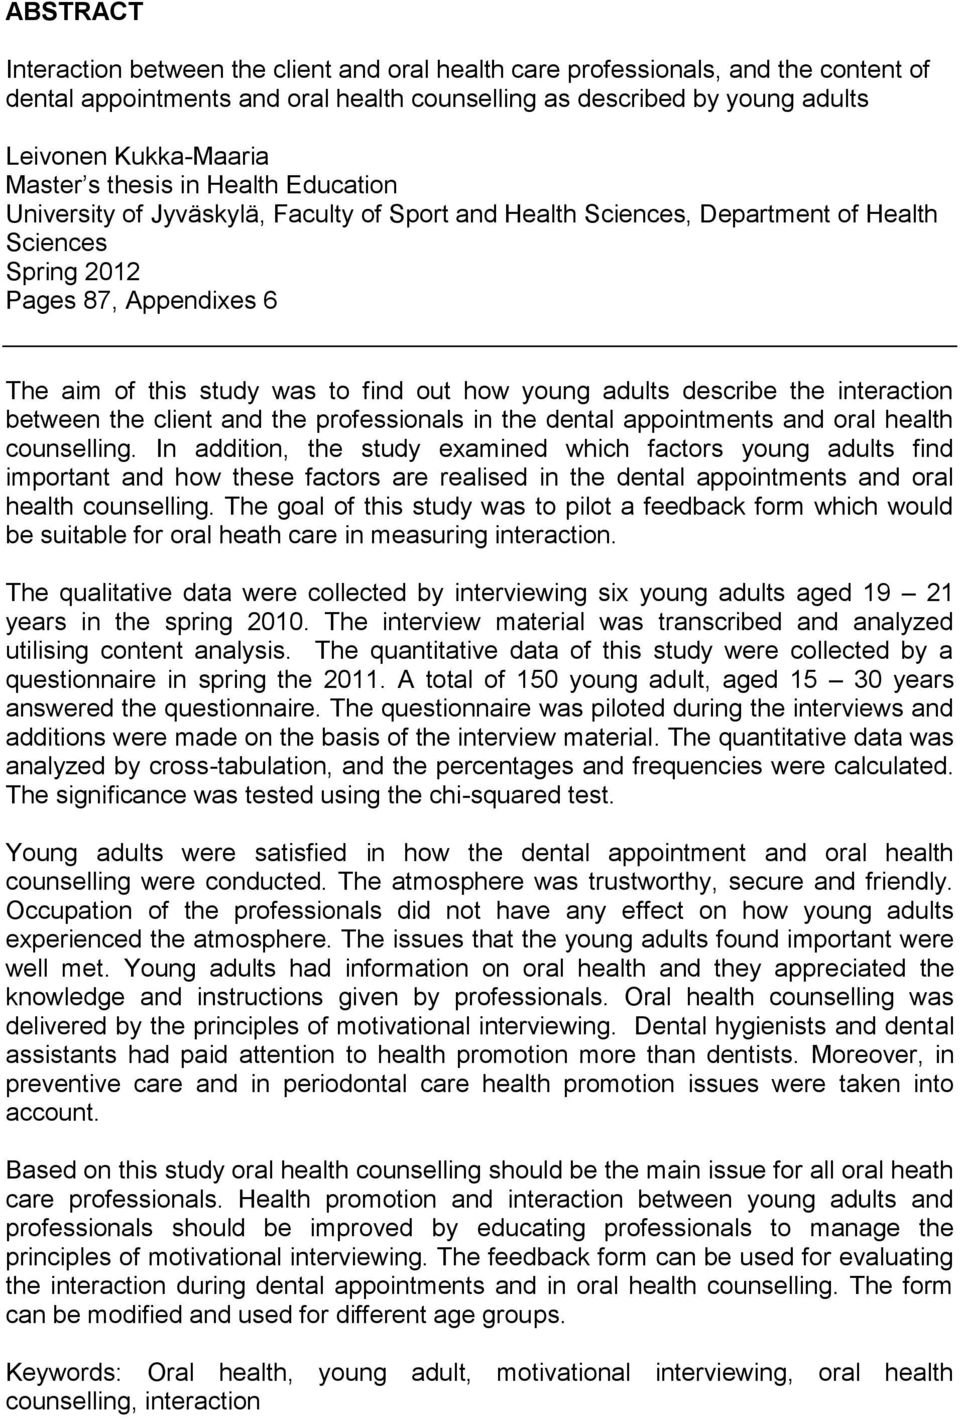 out how young adults describe the interaction between the client and the professionals in the dental appointments and oral health counselling.